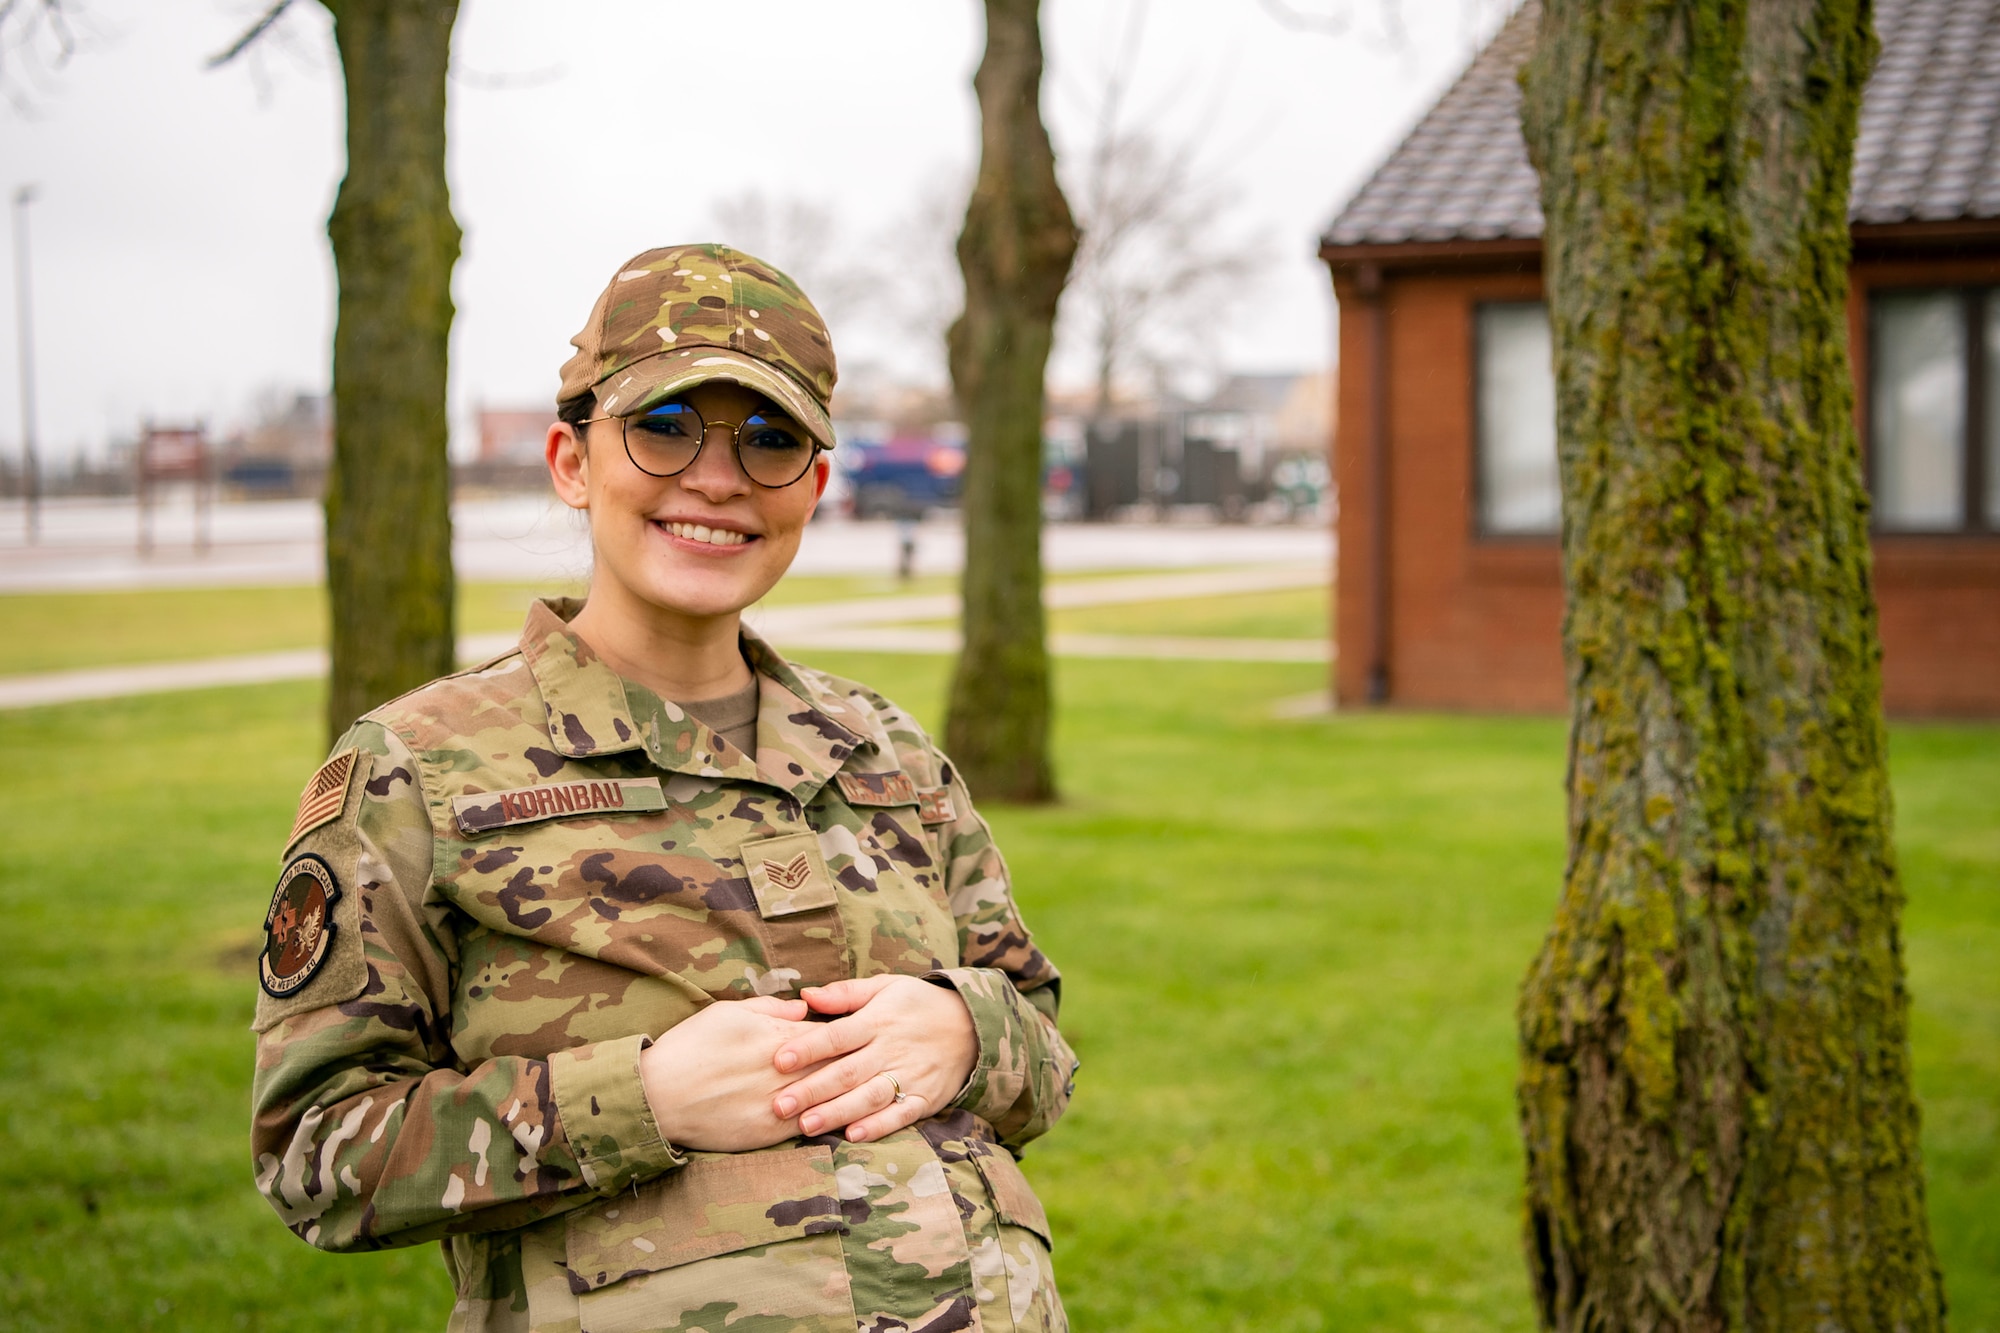 U.S. Air Force Staff Sgt. Shae Kornbau, 423d Medical Squadron NCO in charge of Preventative Dentistry, poses for a phot at RAF Alconbury, England, March 7, 2023. This photo is part of a project to highlight female Airmen from across the wing in honor of Women's History Month. (U.S. Air Force photo by Staff Sgt. Eugene Oliver)